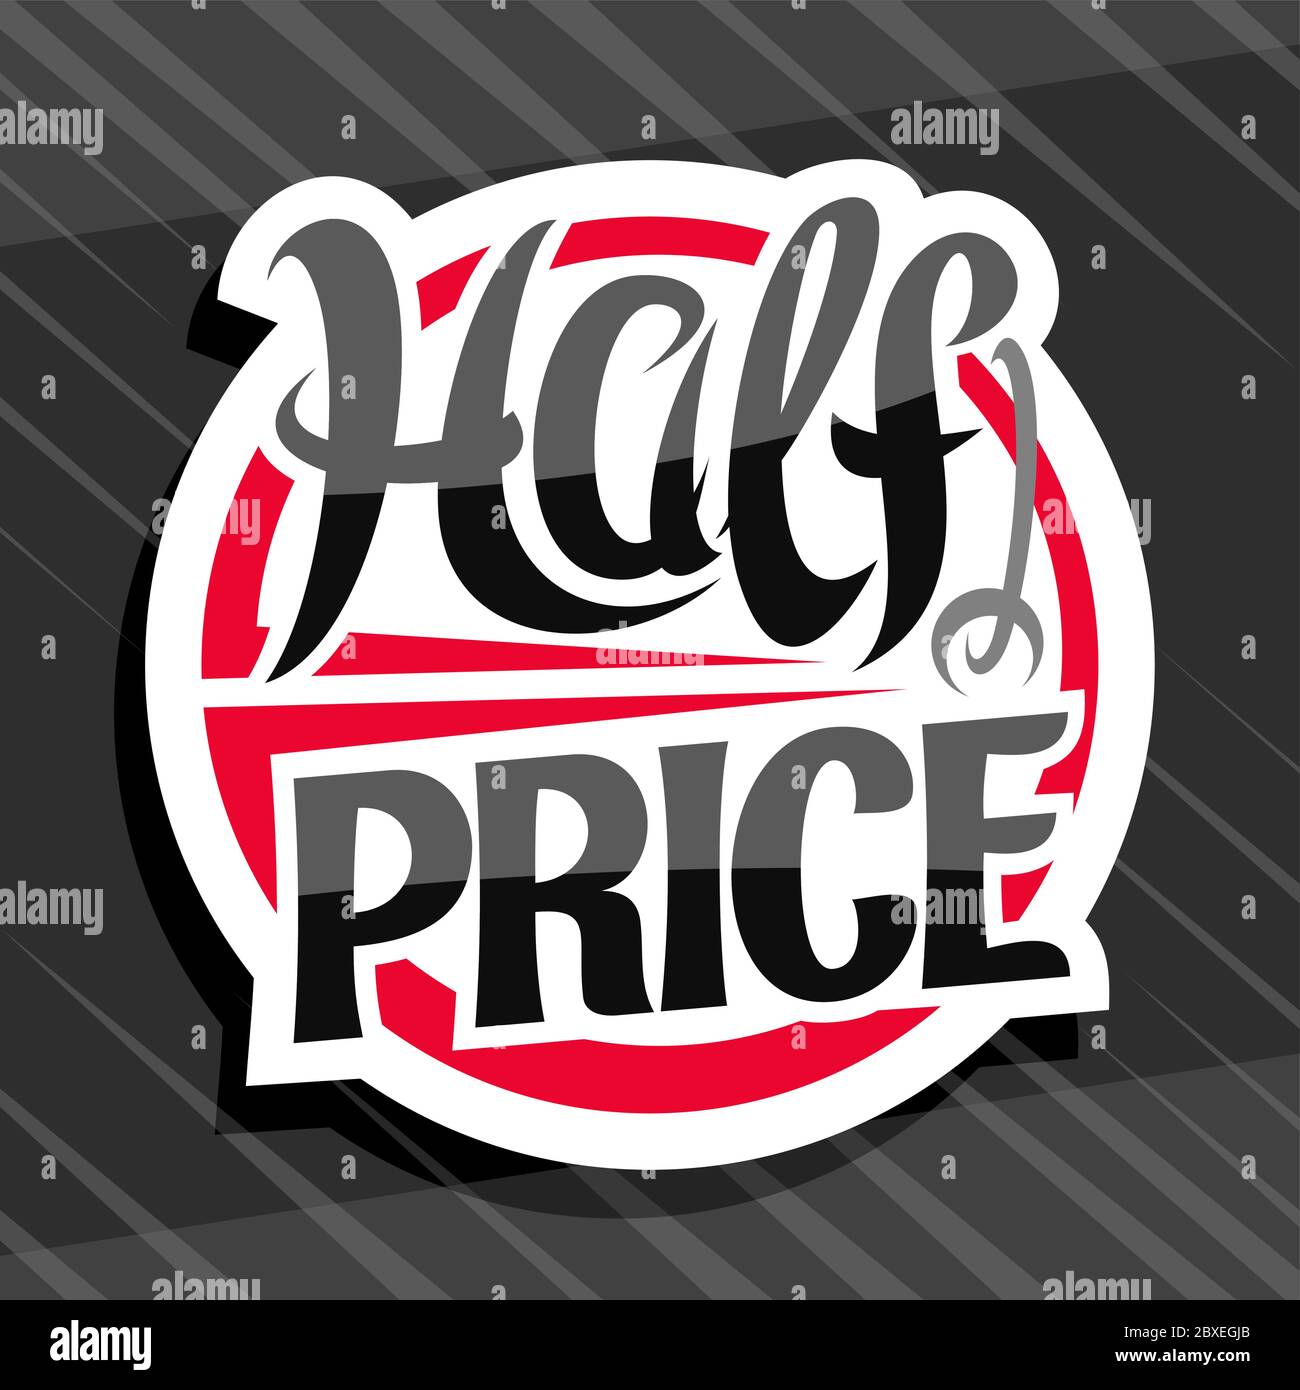 Vector logo for Half Price Sale, white decorative price tag for black friday or cyber monday sale with unique handwritten lettering for words half pri Stock Vector